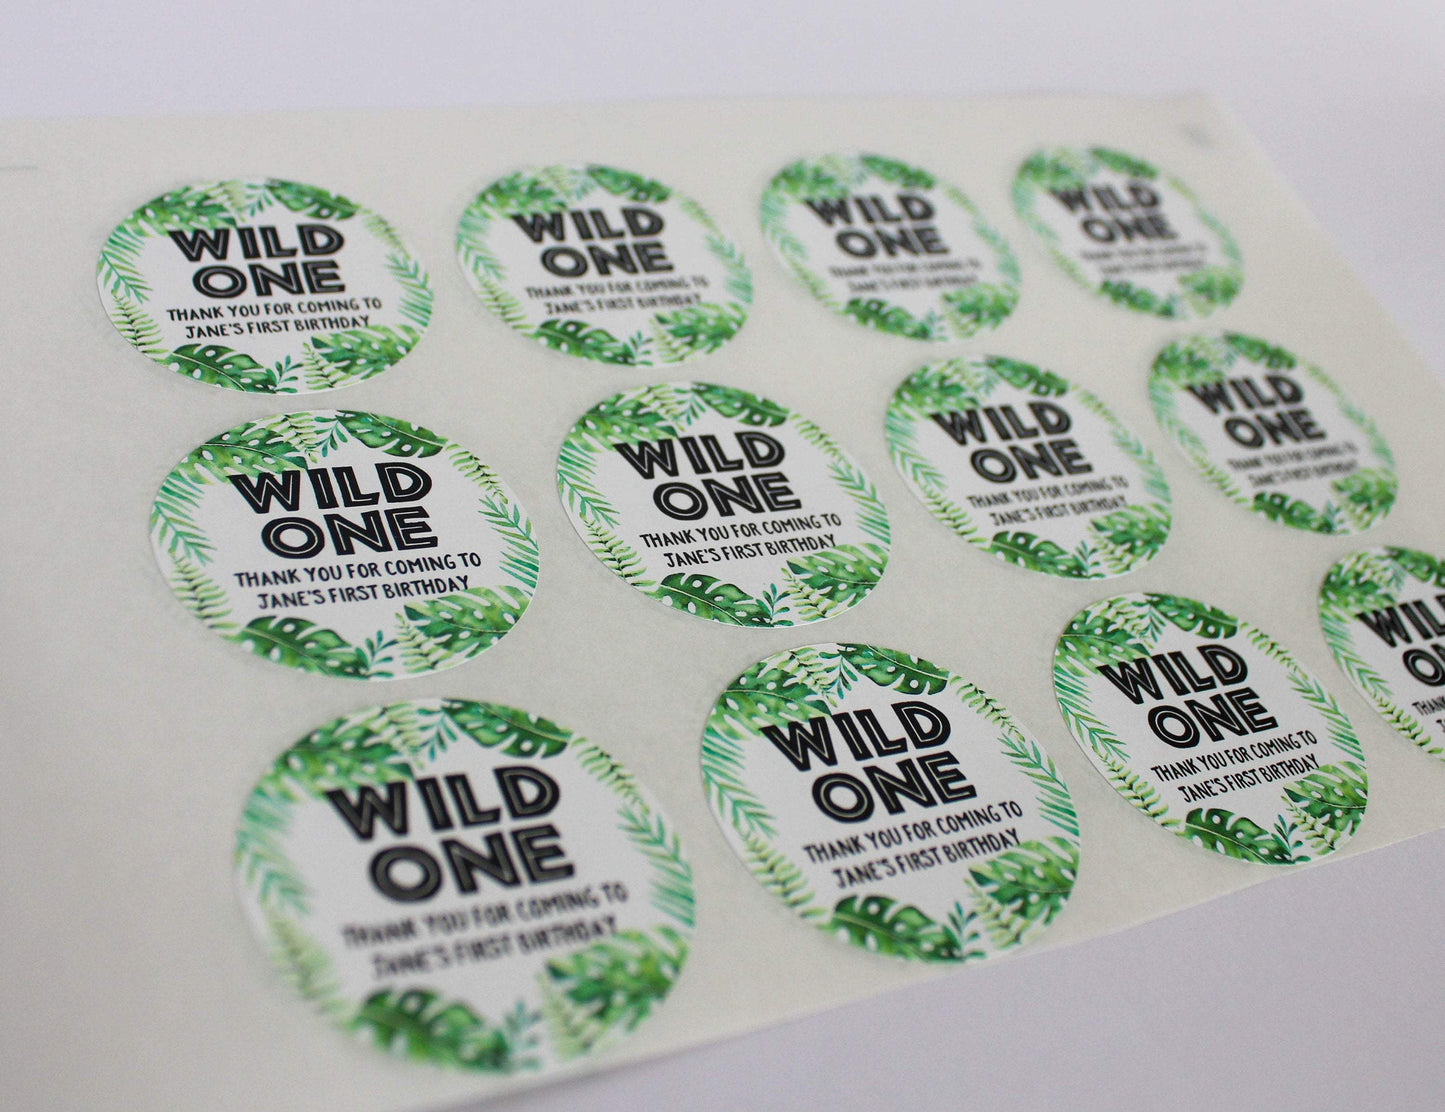 E&L Designs Wild One with Leaves Personalised Sticker